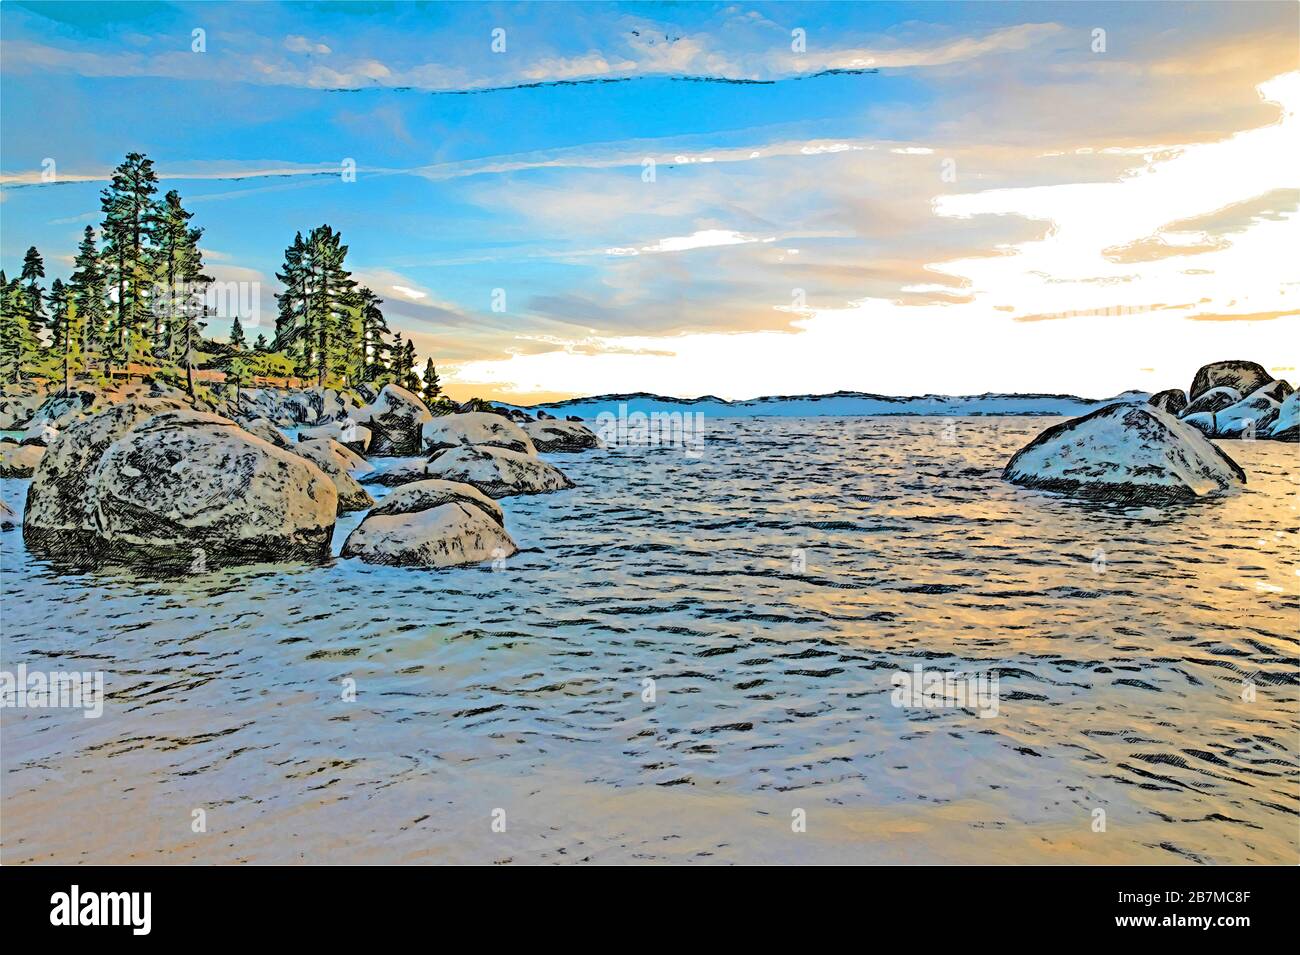 Lake Tahoe is a large freshwater lake in the Sierra Nevada mountains in the United States, located between the California and Nevada Stock Photo